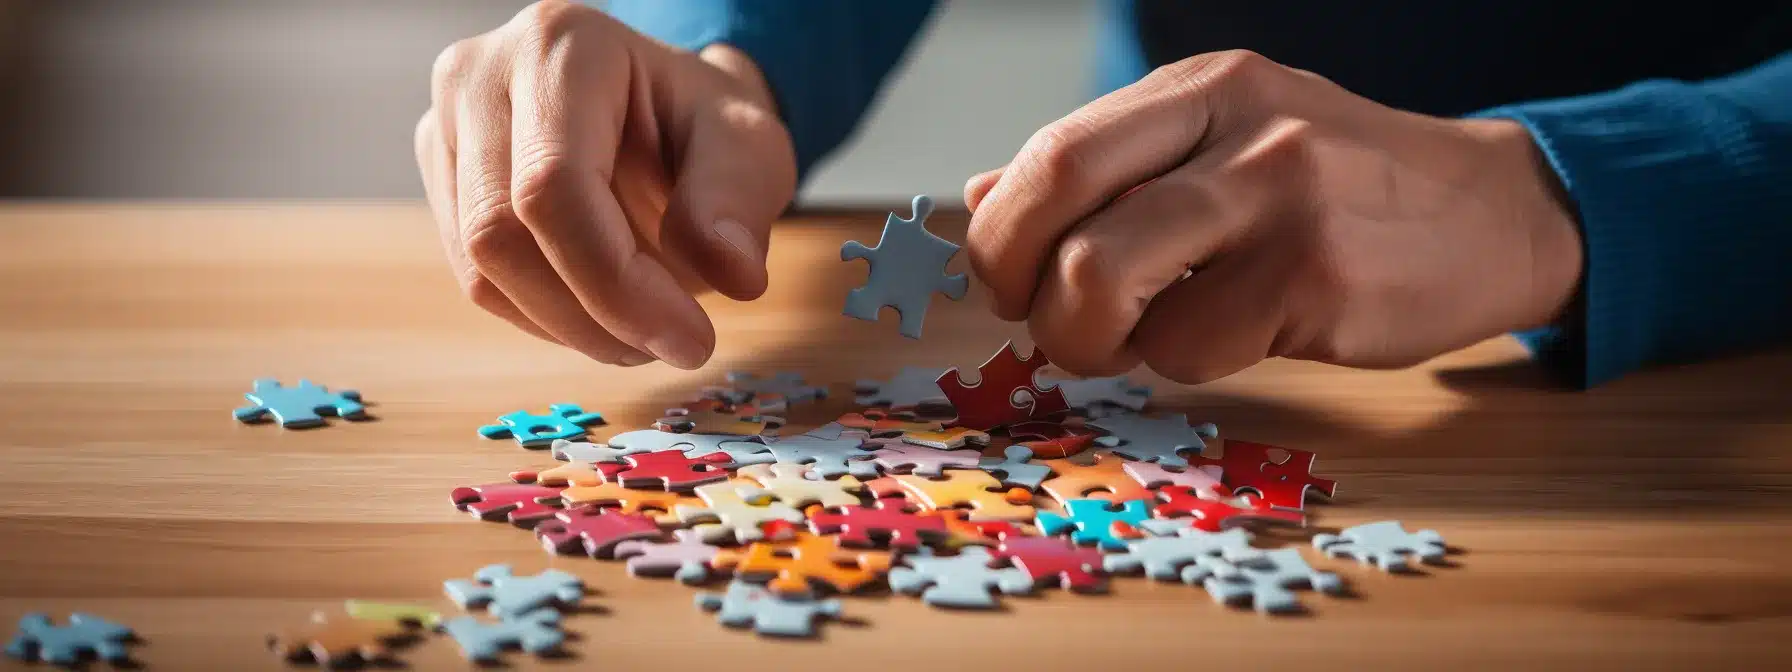 A Person Carefully Assembling A Jigsaw Puzzle With Brand Elements To Form A Coherent Image.